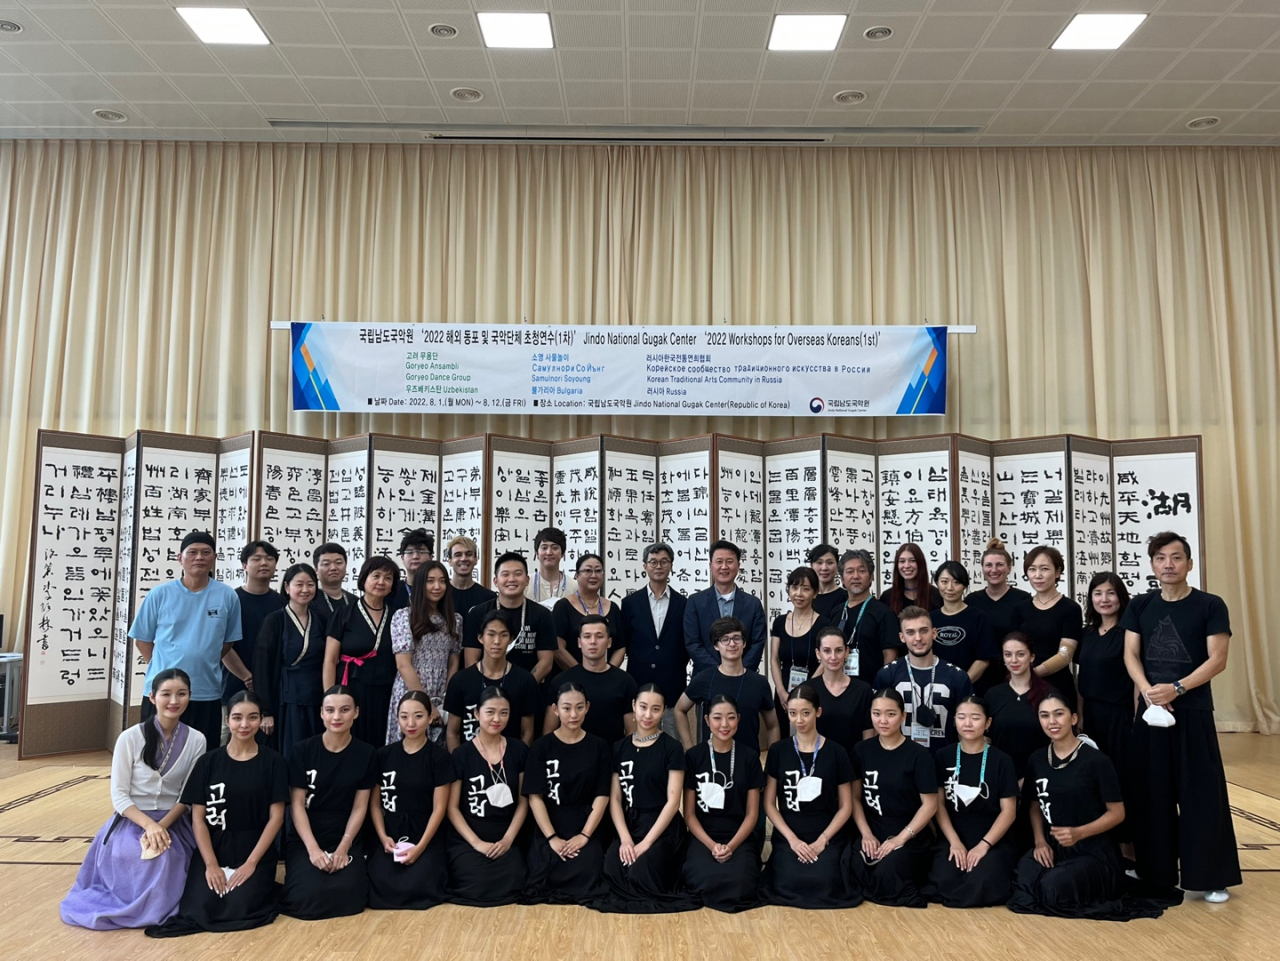 Participants of the 2022 Invitation program pose for a group photo. (Jindo National Gugak Center)